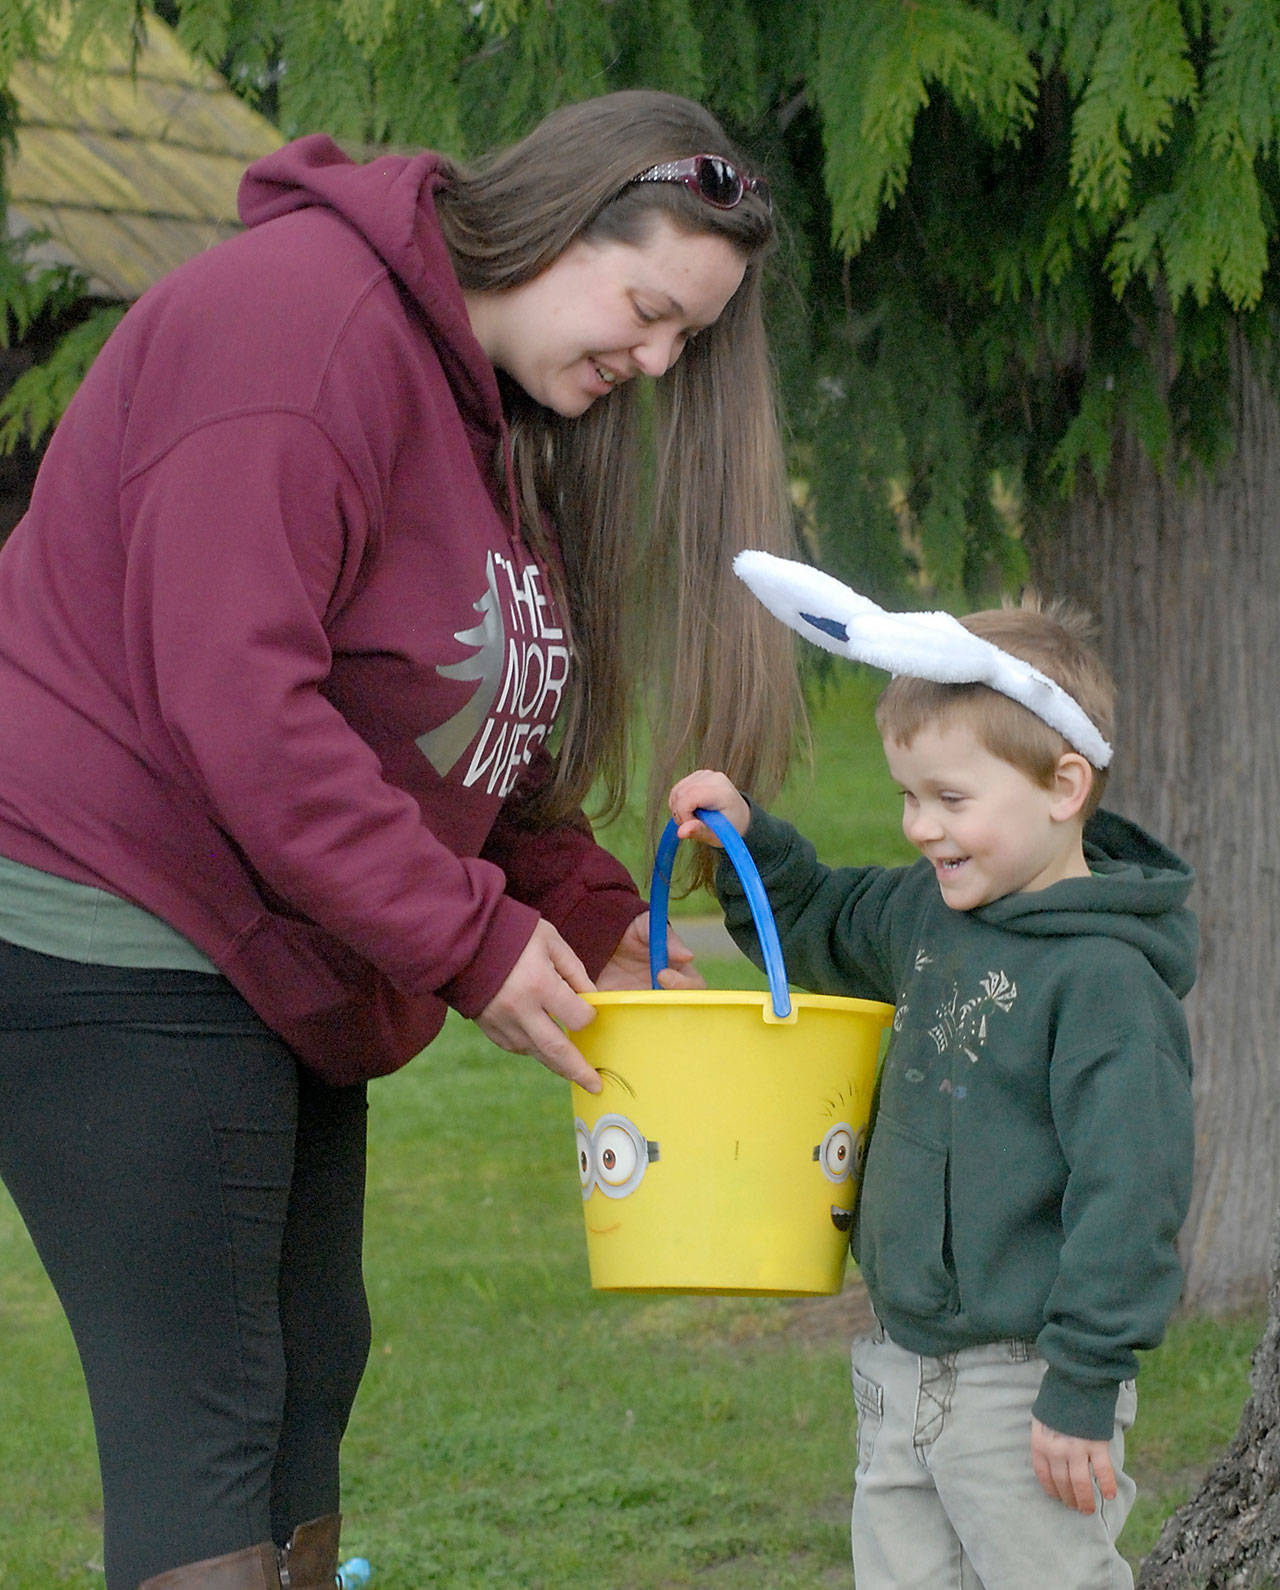 Thomas Dallgardno, 3, shows off his bucket of eggs to his mother, Whitney Dalgardno of Port Angeles, during Saturday’s KONP Easter egg hunt at the Clallam County Fairgrounds in Port Angeles. (Keith Thorpe/Peninsula Daily News)